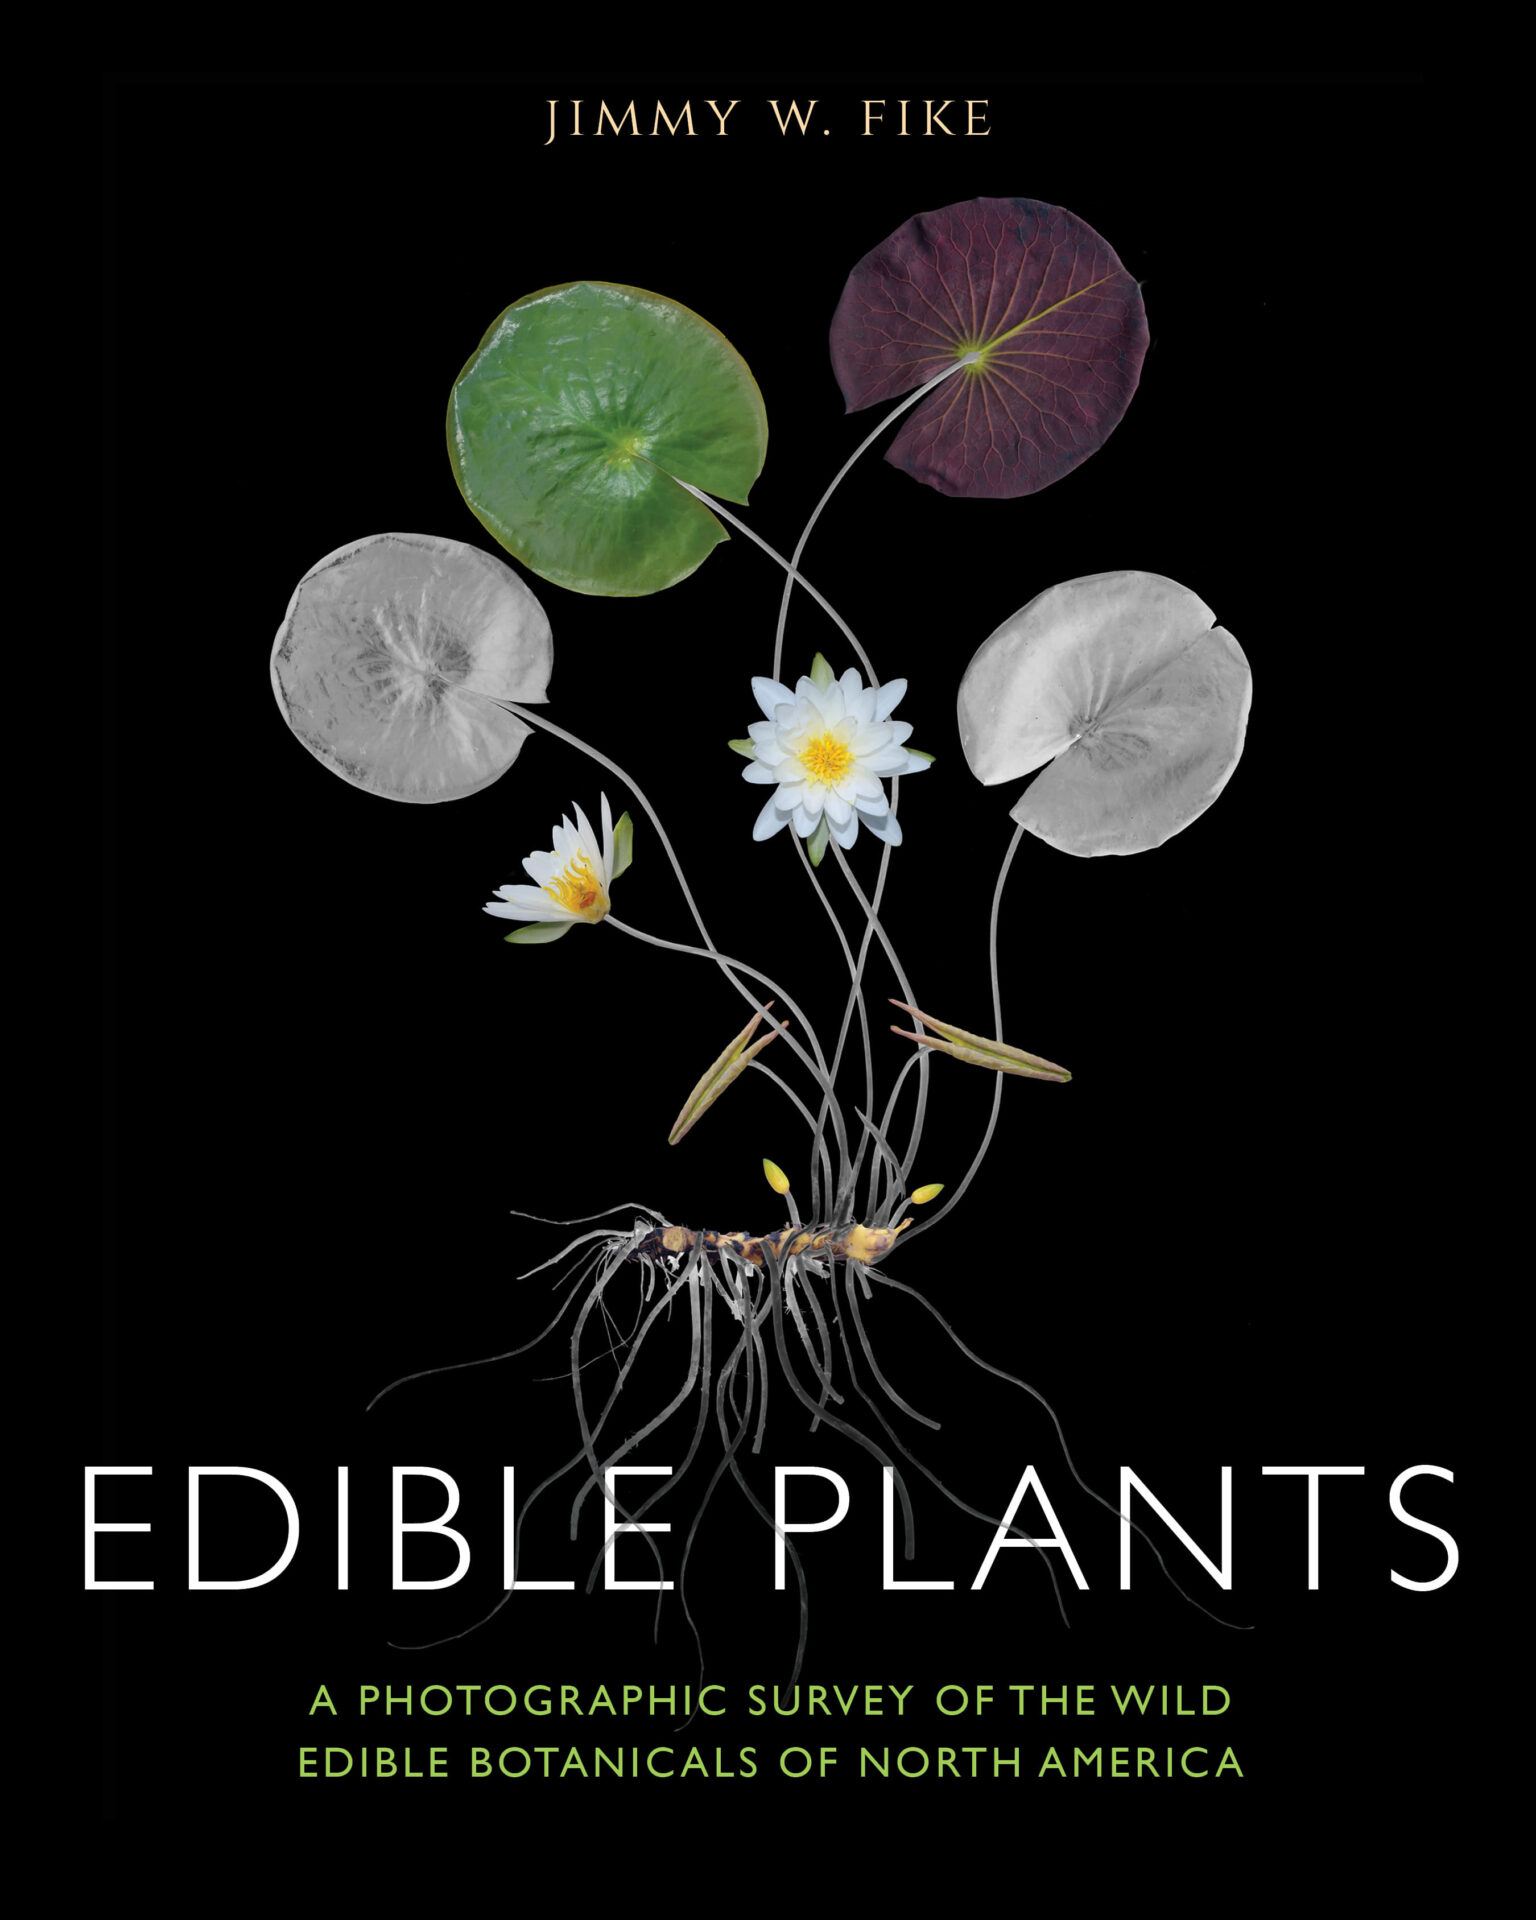 Edible Plants by Jim Fike on sale now  in the Visitor Center